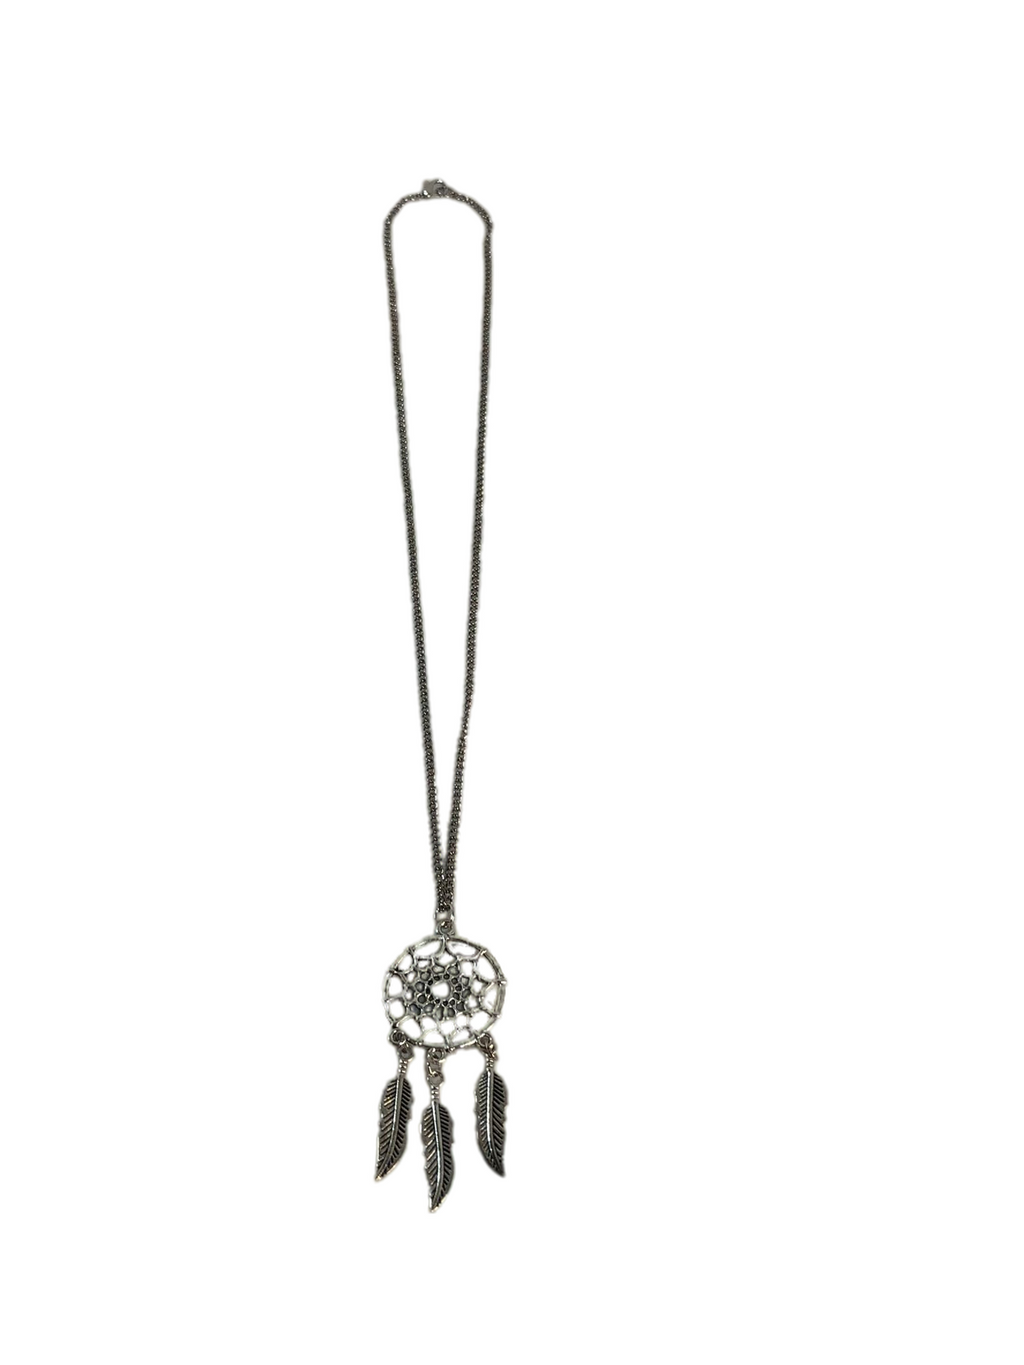 Mother's Day Necklace Dreamcatcher Good Luck Charm Silver-Tone Pendant Necklace Spiritual Gift Idea